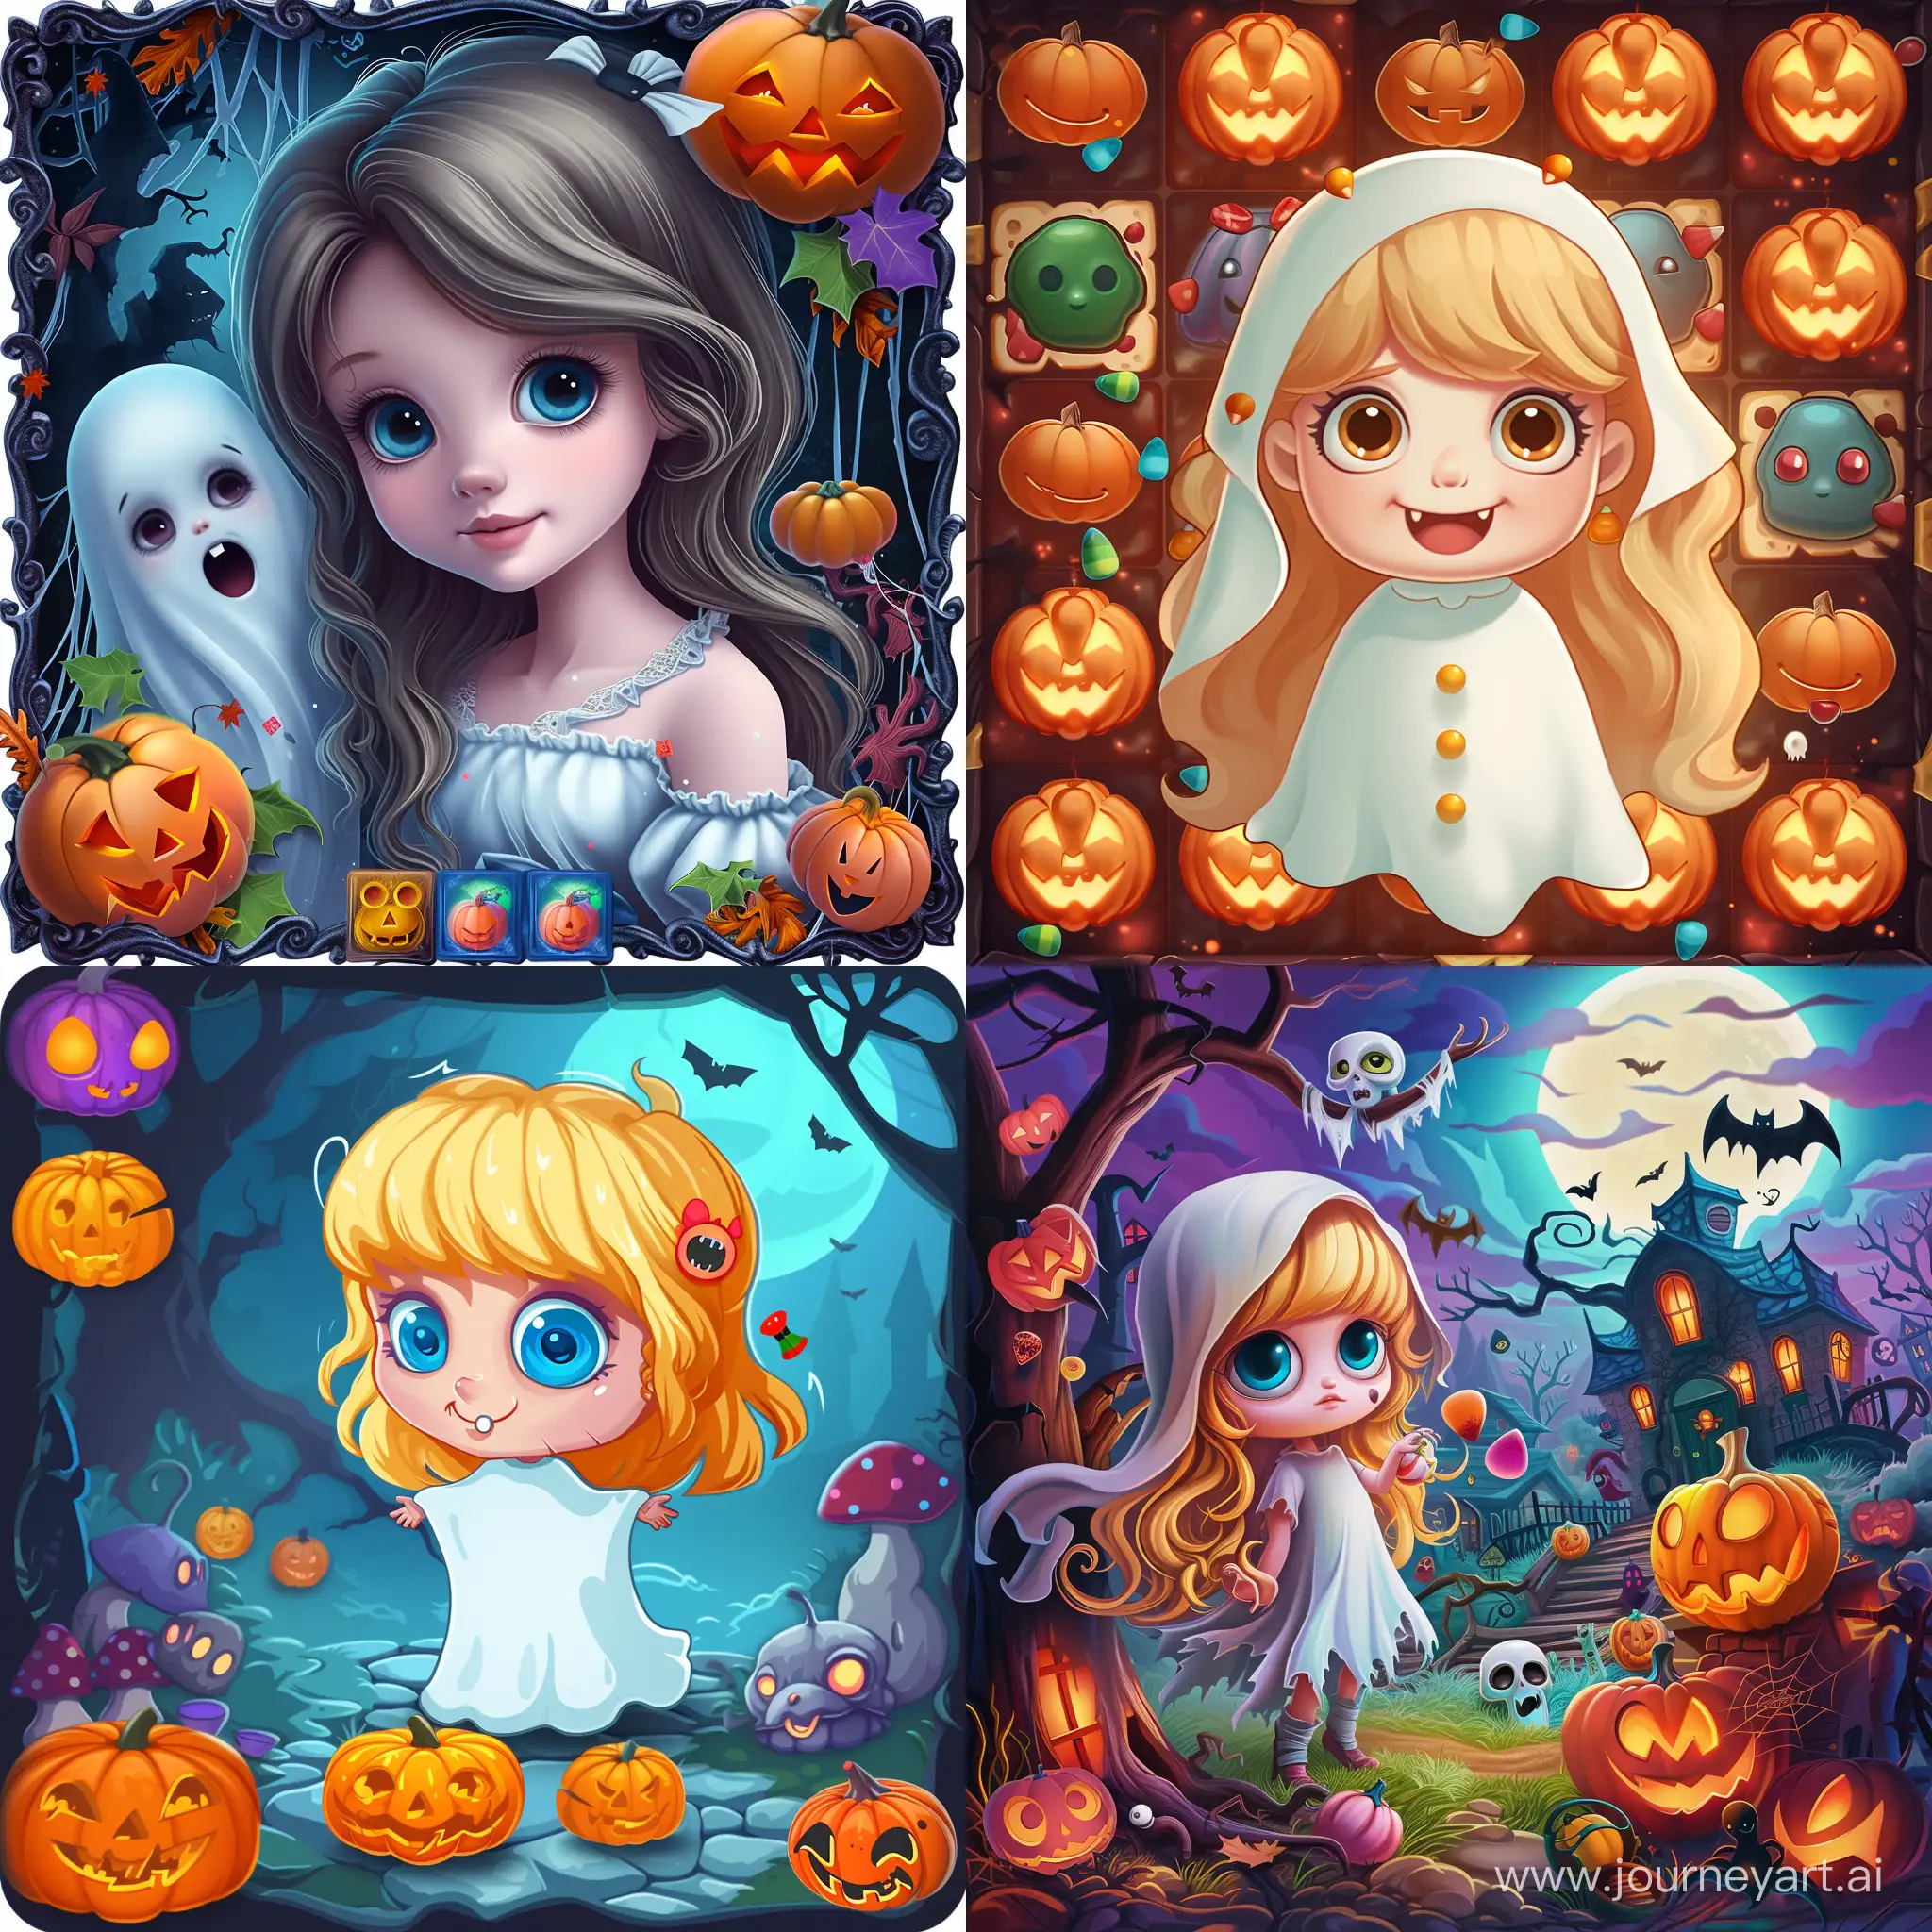 Spooky-Halloween-Match3-Game-Screensaver-Featuring-a-Ghost-Girl